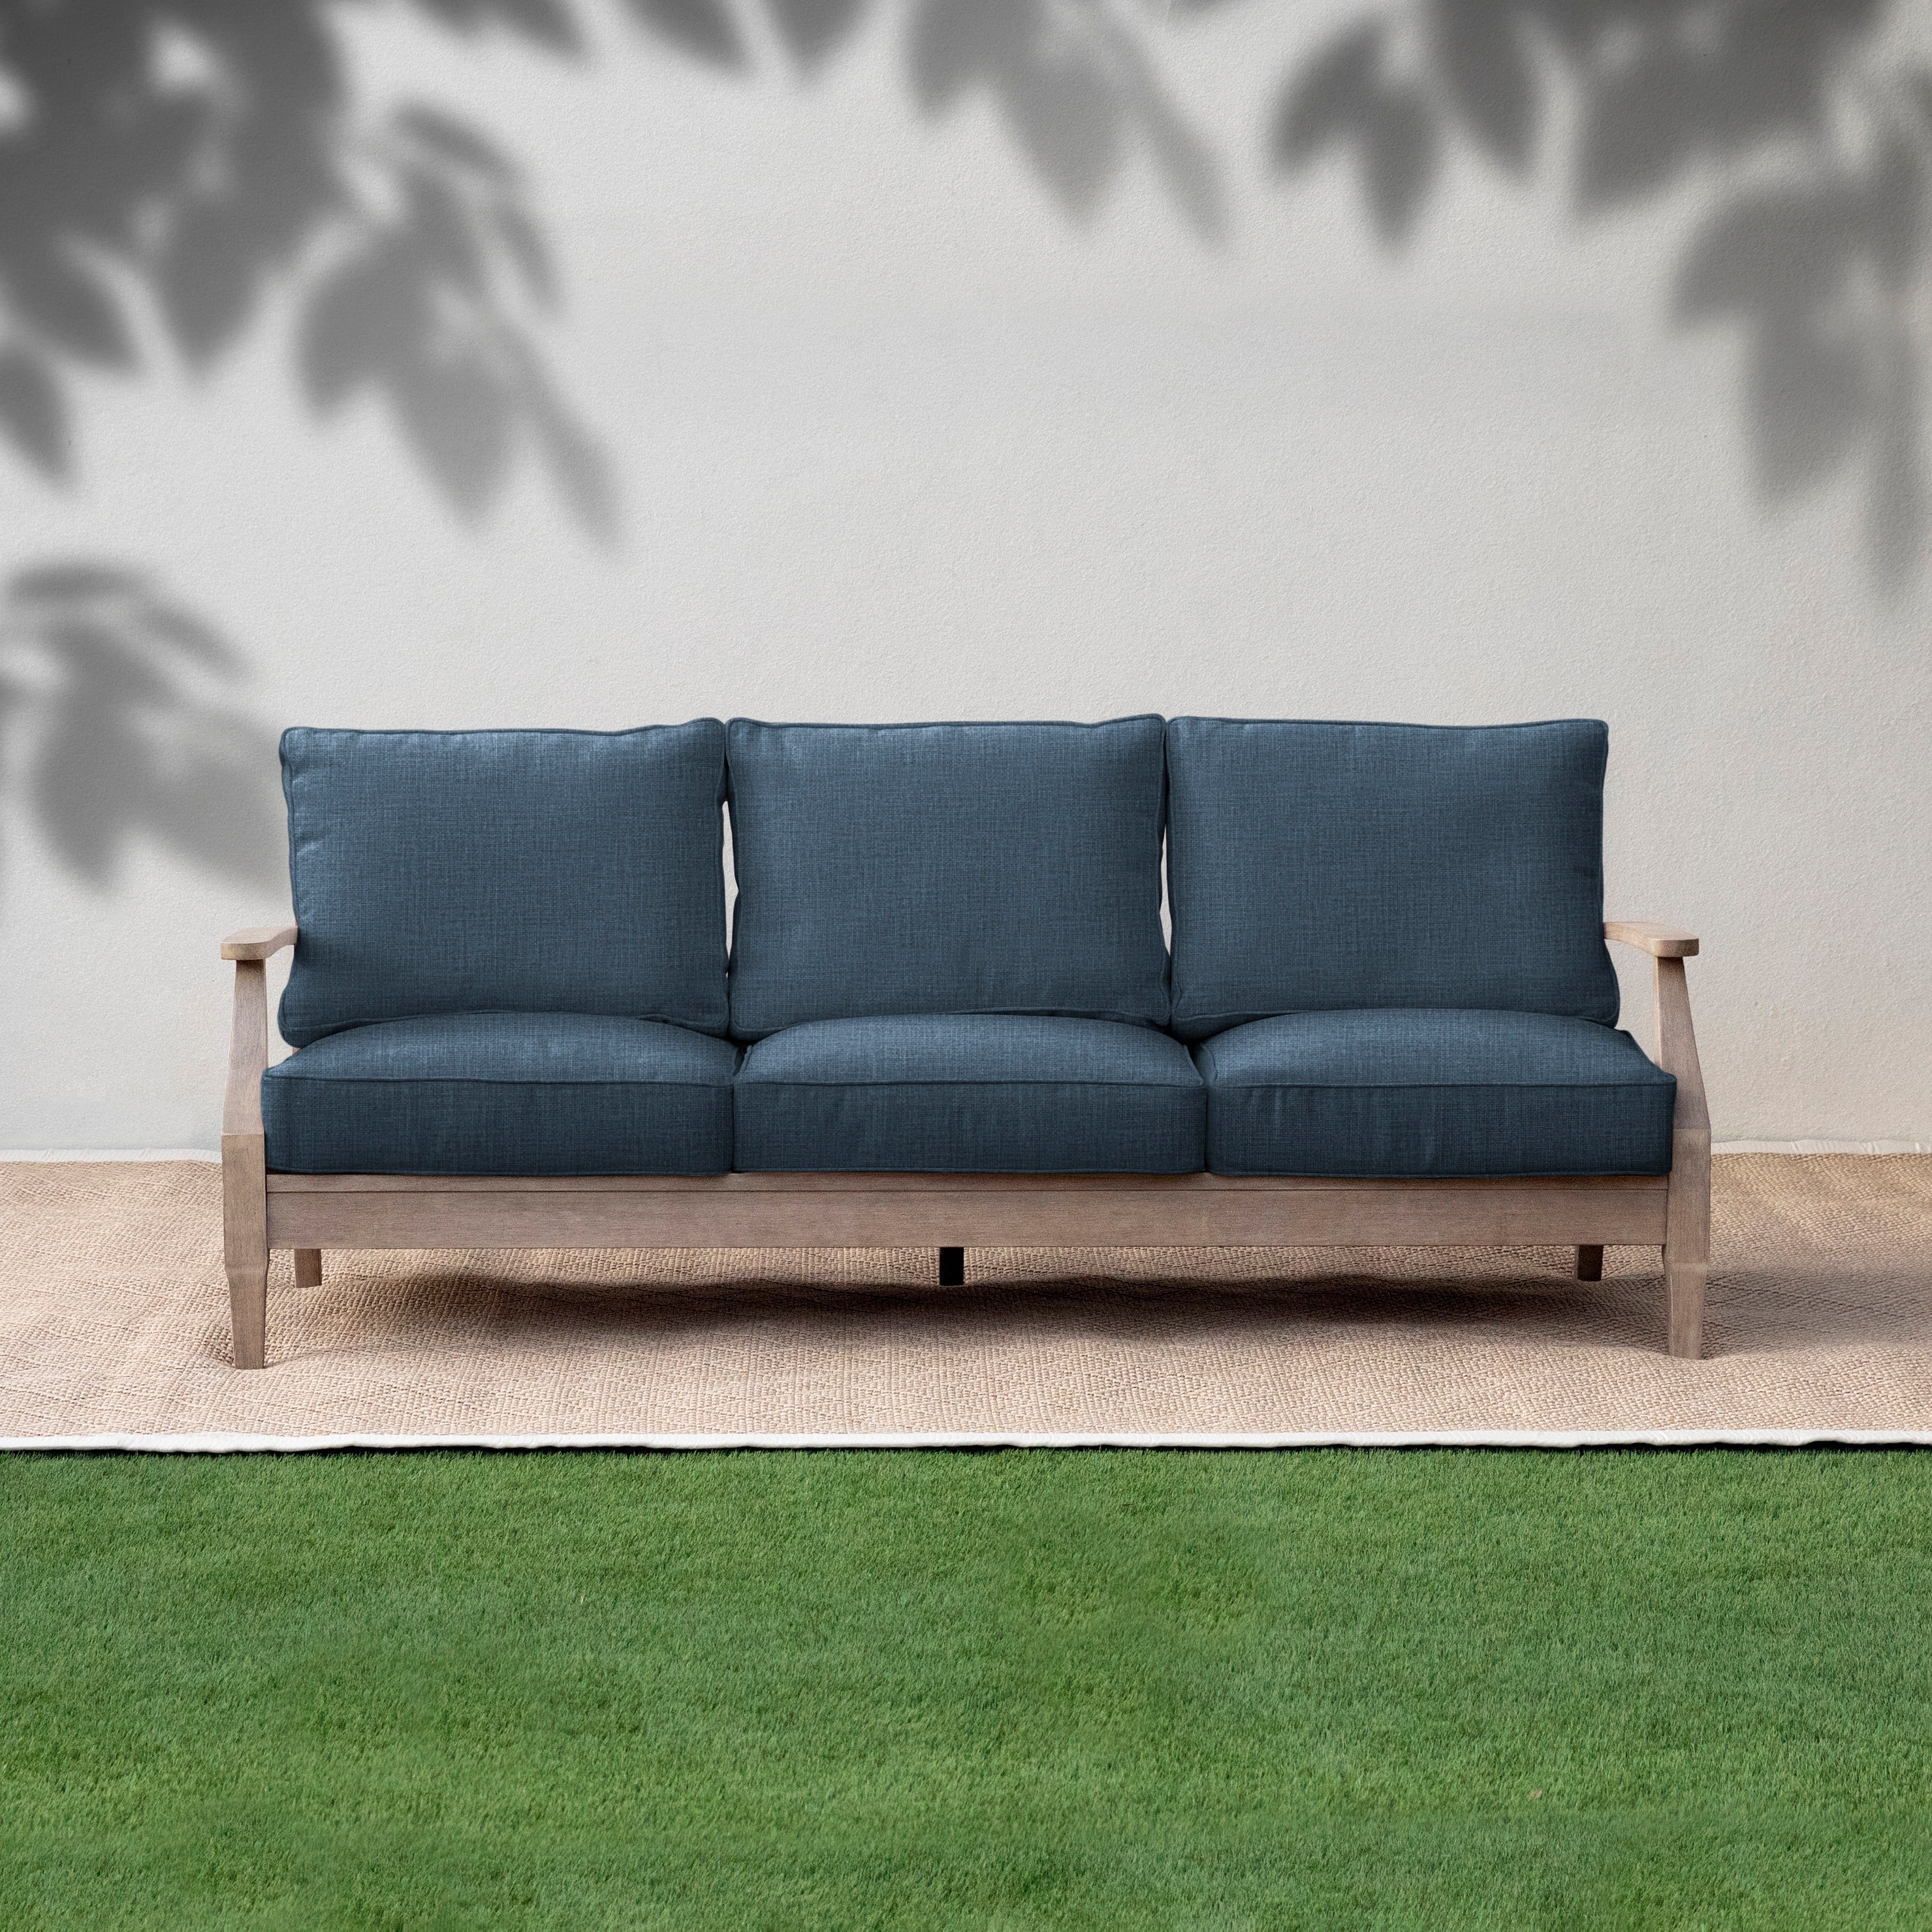 https://ak1.ostkcdn.com/images/products/is/images/direct/eea7ad60633900ee9f9788e7e0204a1ffb0063cf/Humble-%2B-Haute-Indoor-Outdoor-Deep-Seating-Sofa-Cushion-Set.jpg